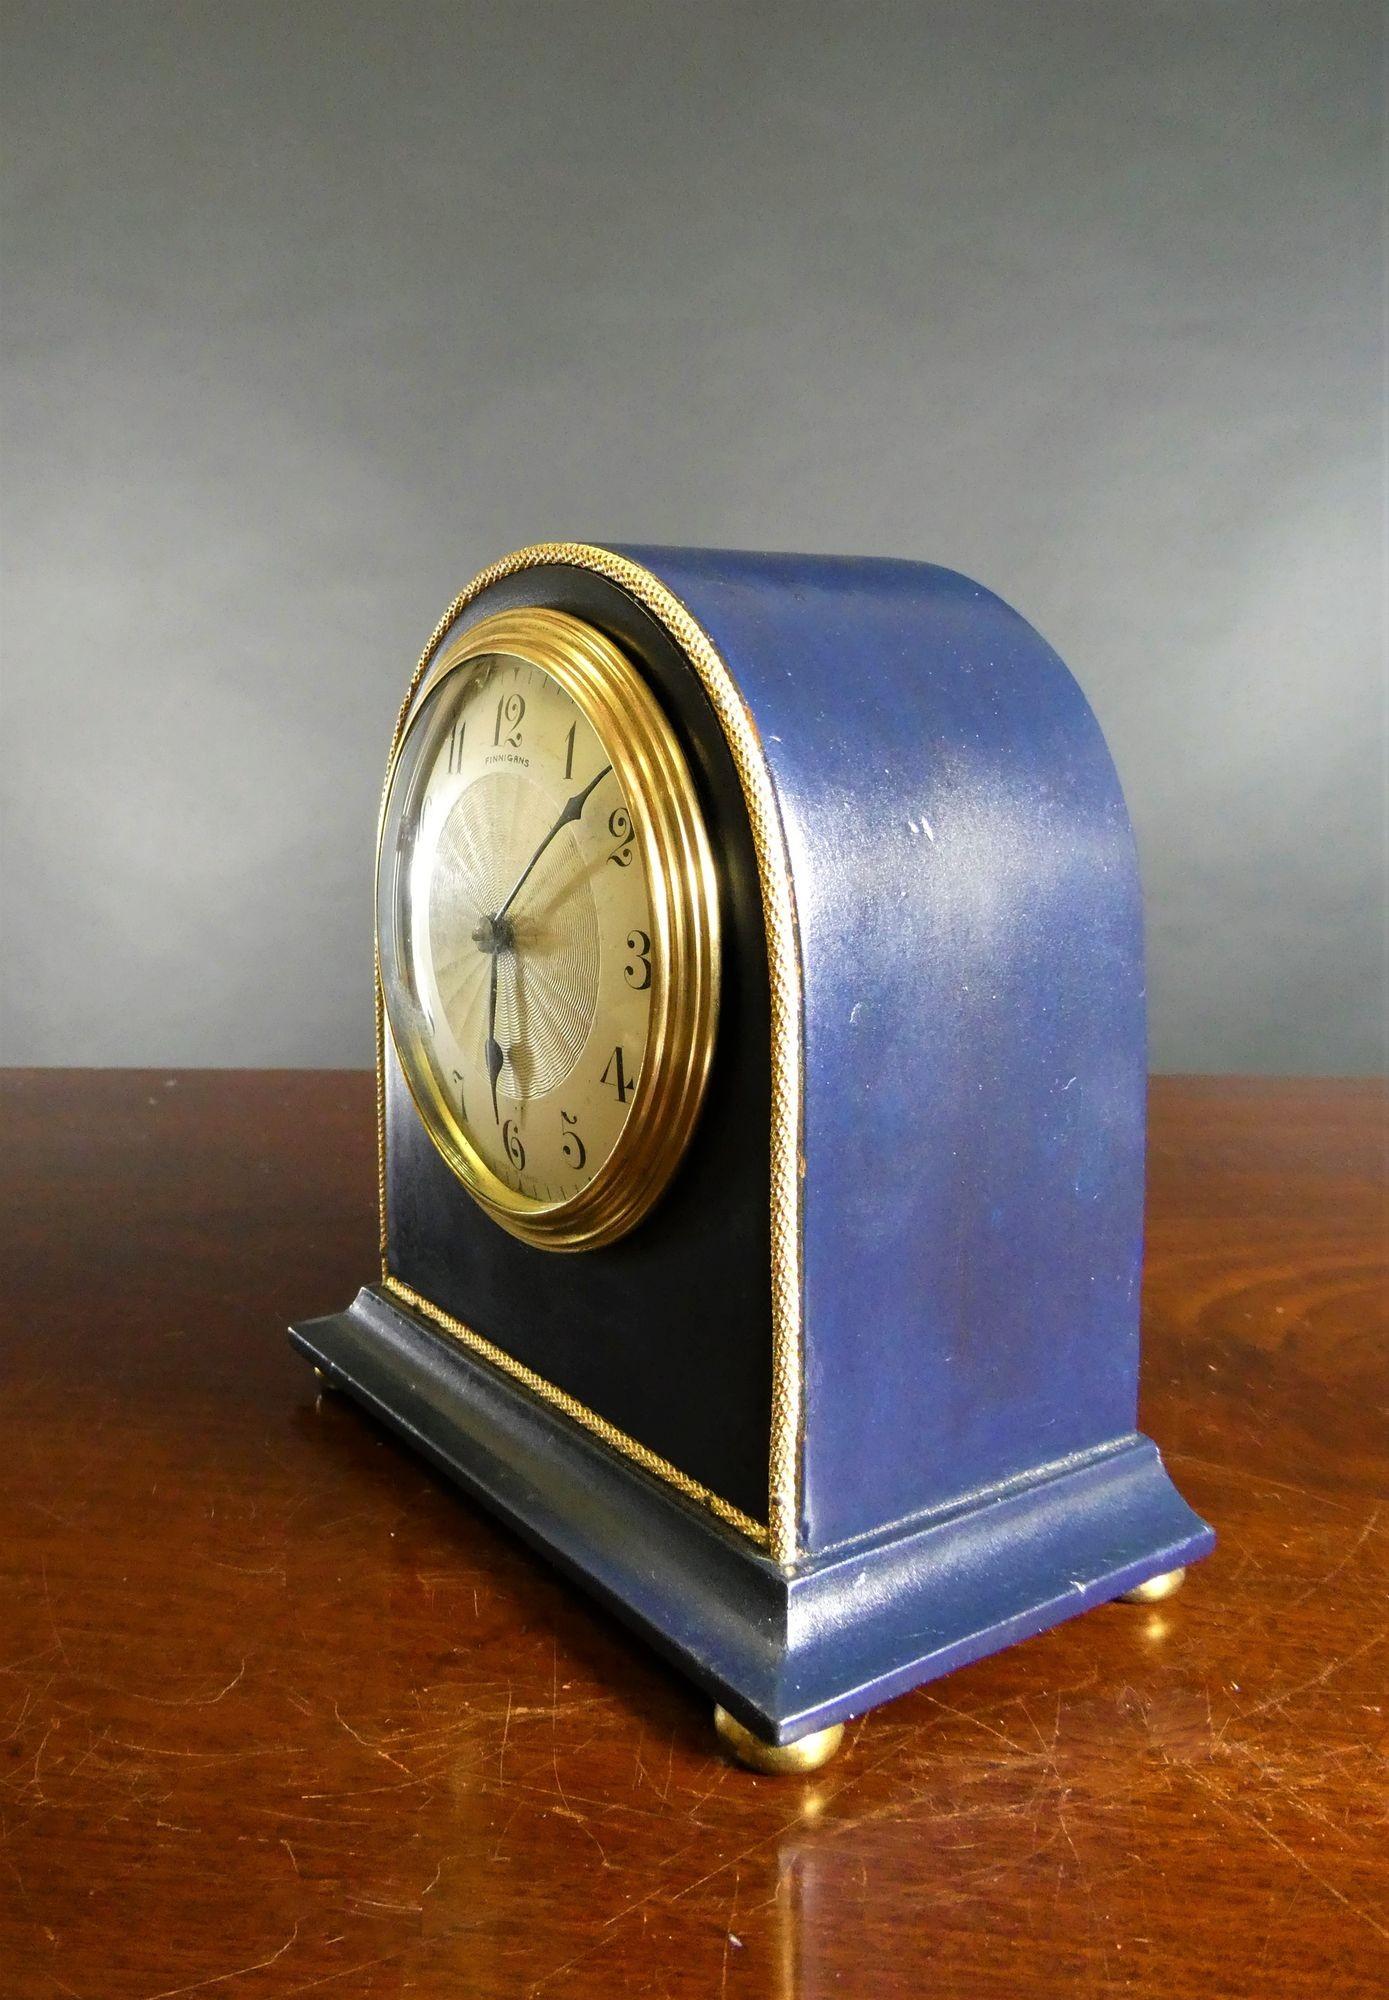 Edwardian Mantel Clock Signed Finnigans In Good Condition For Sale In Norwich, GB